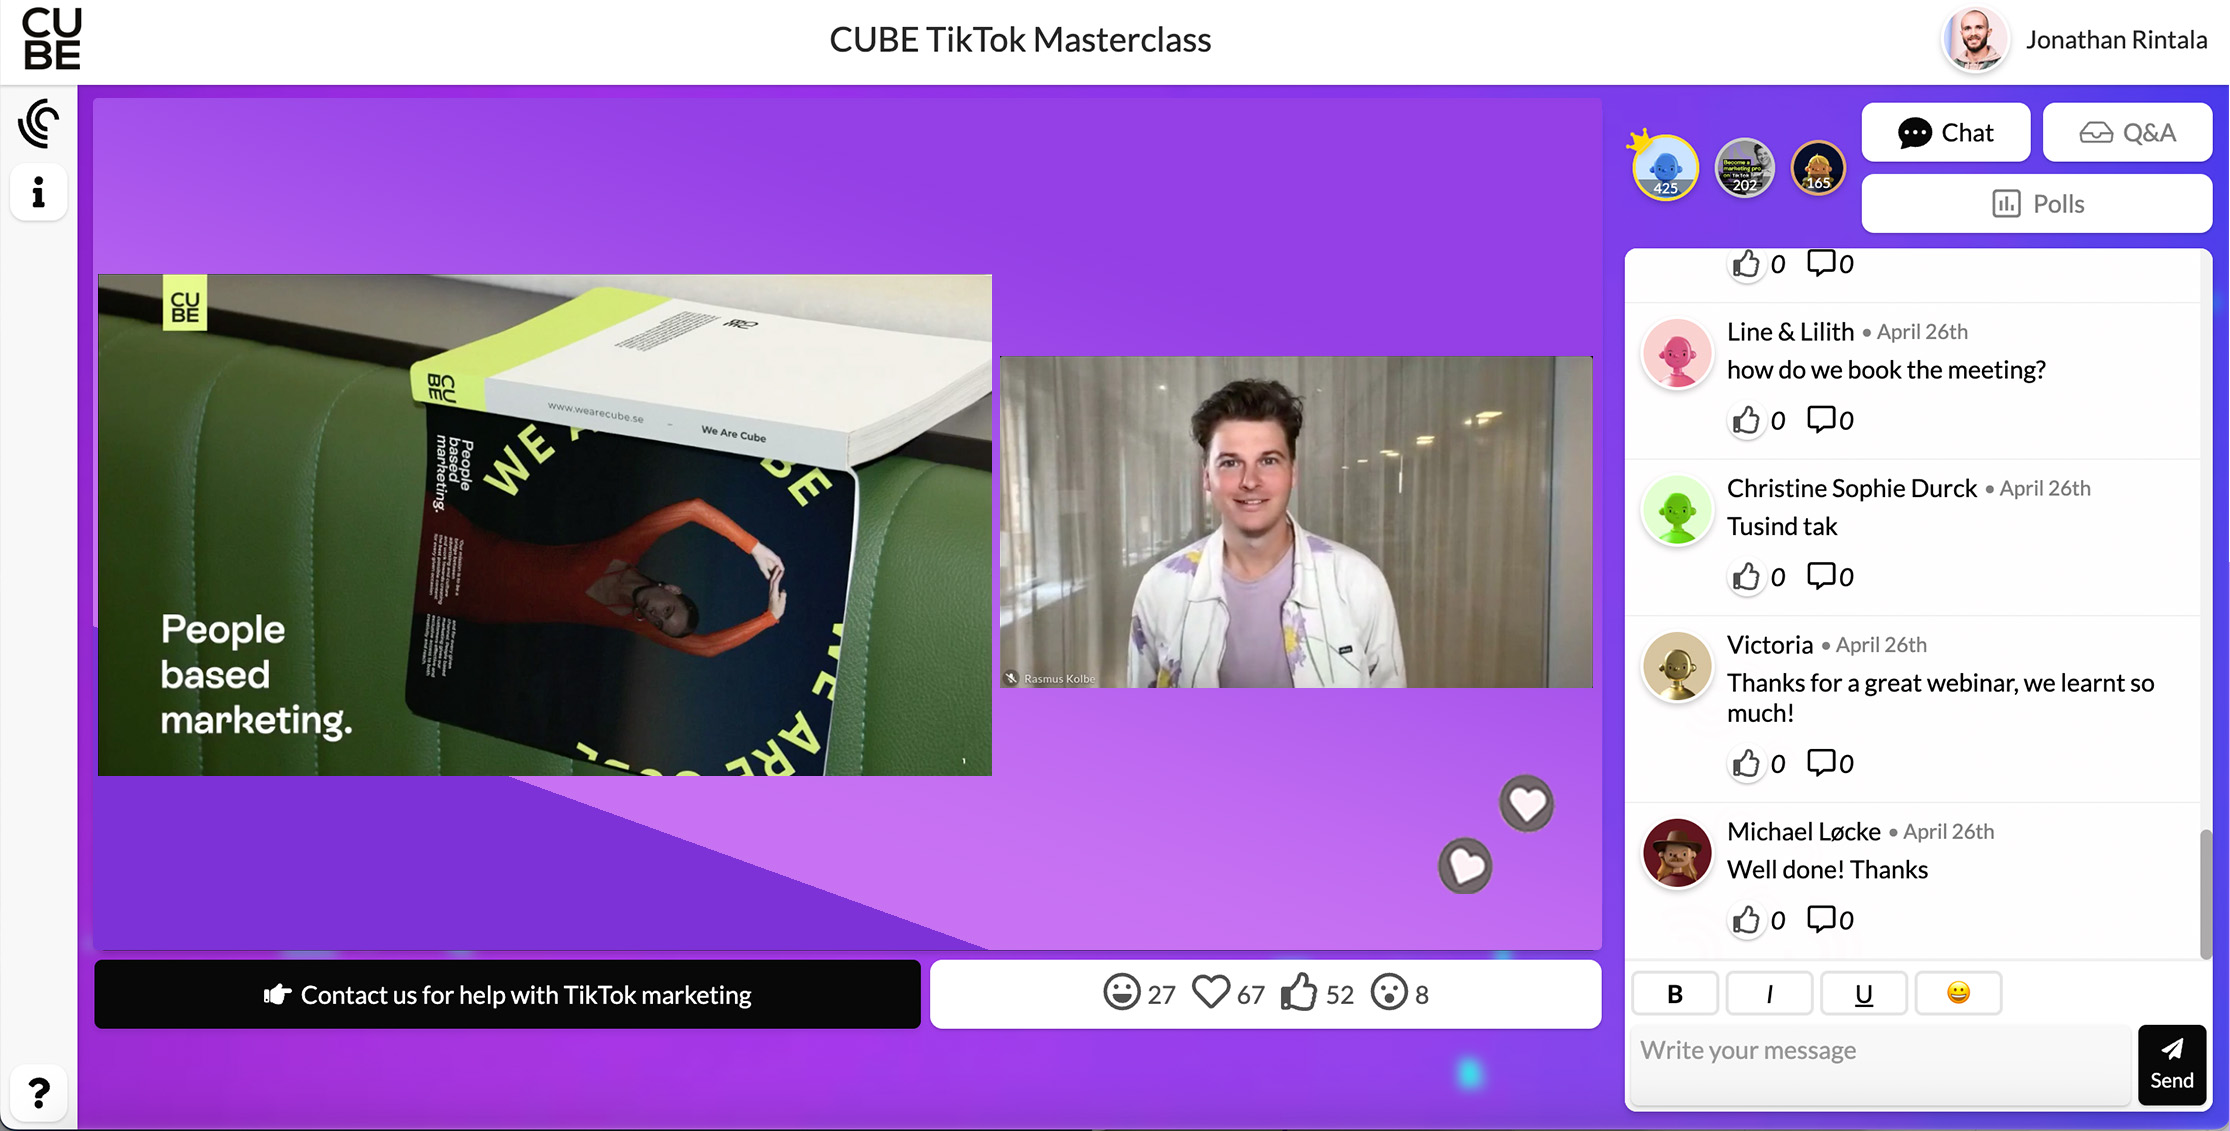 TikTok + webinars = true? 🤯 Yes, it works! Cube invited to a webinar called TikTok for Business – Book our Masterclass. As experts on TikTok, Cube wanted a lot of interaction. The webinar had a crazy conversion rate using the CTA button – 30% of the attendees decided to book a meeting with Cube to learn more. This goes to show the power of combining long and short format (with a platform like Univid).